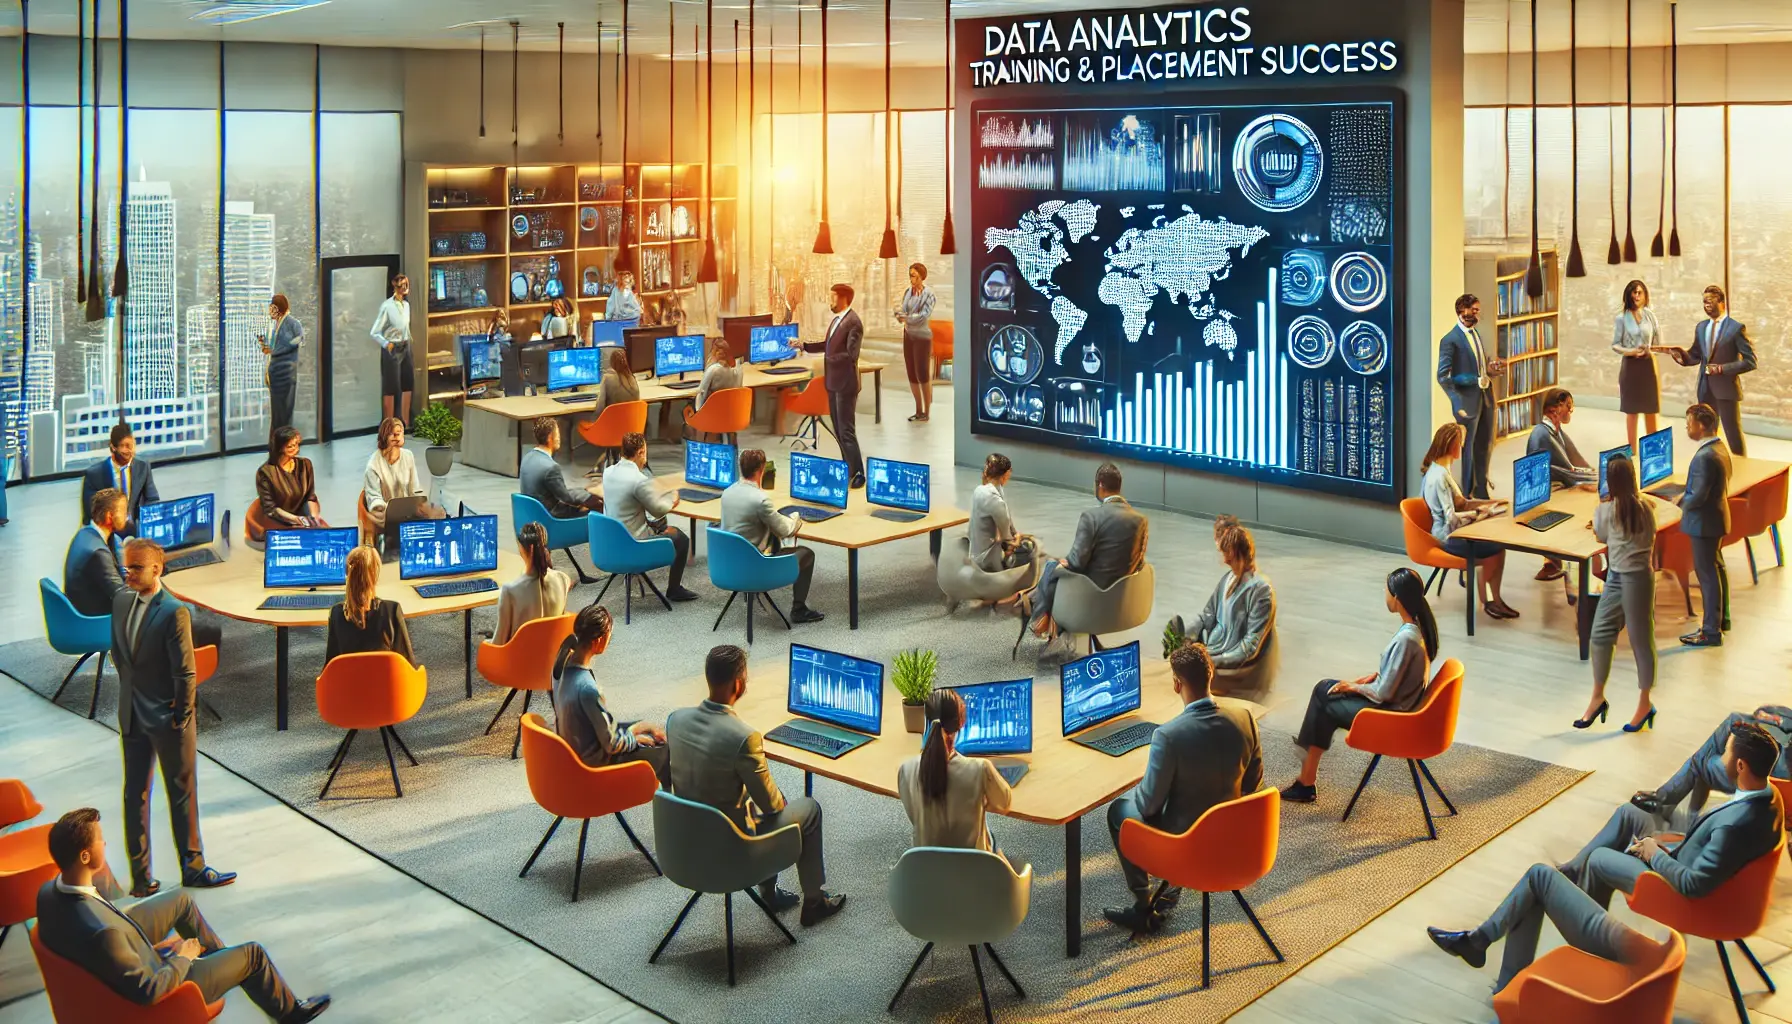 Unlock Your Potential: Data Analytics Training & Placement for Success